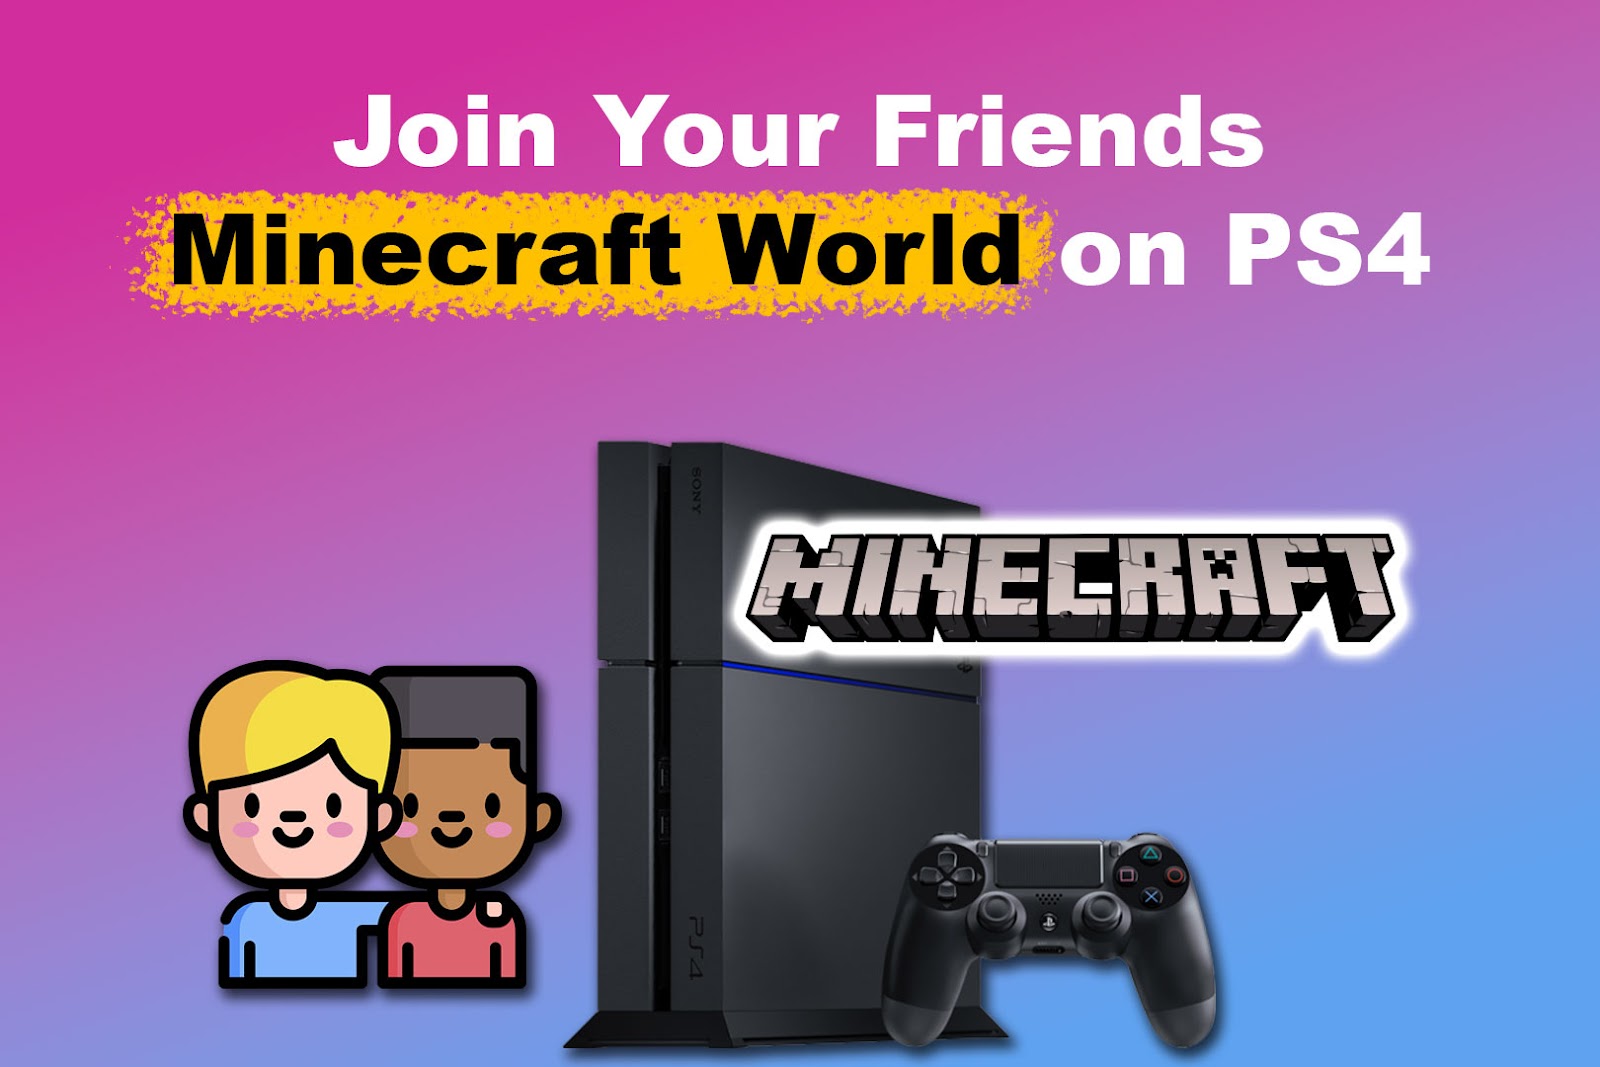 Why You Can't Join Friends Minecraft World PS4